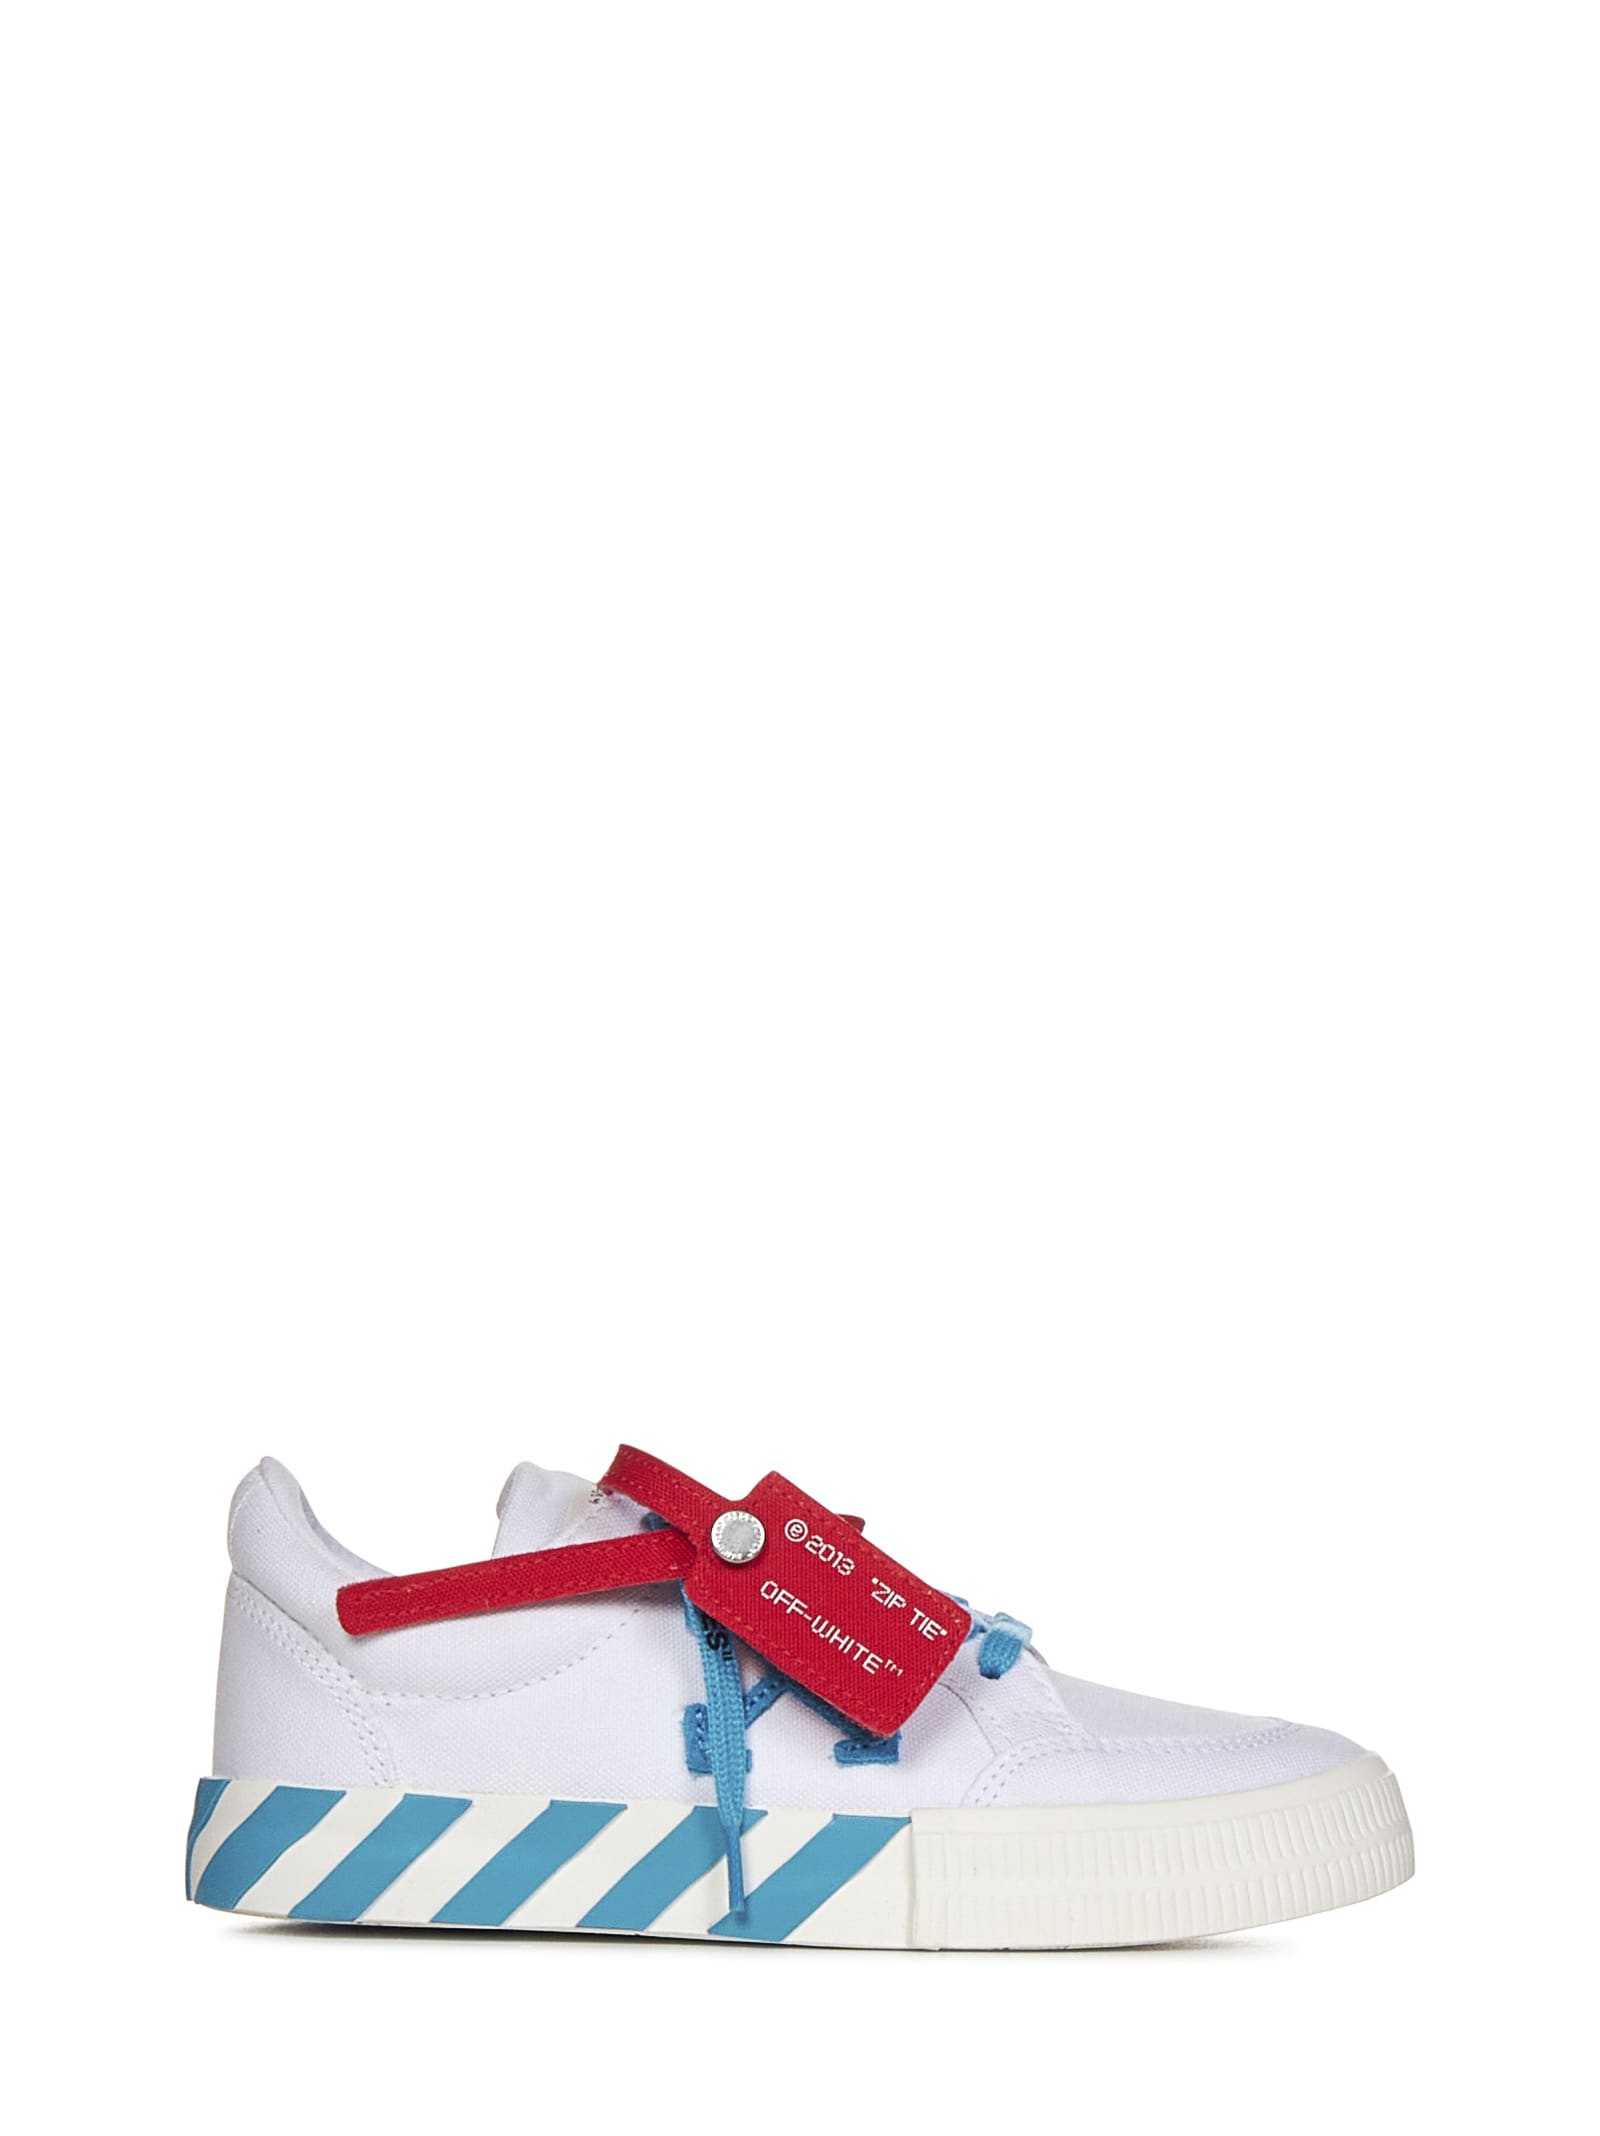 Off-White Vulcanized Lace Up Canvas Sneakers